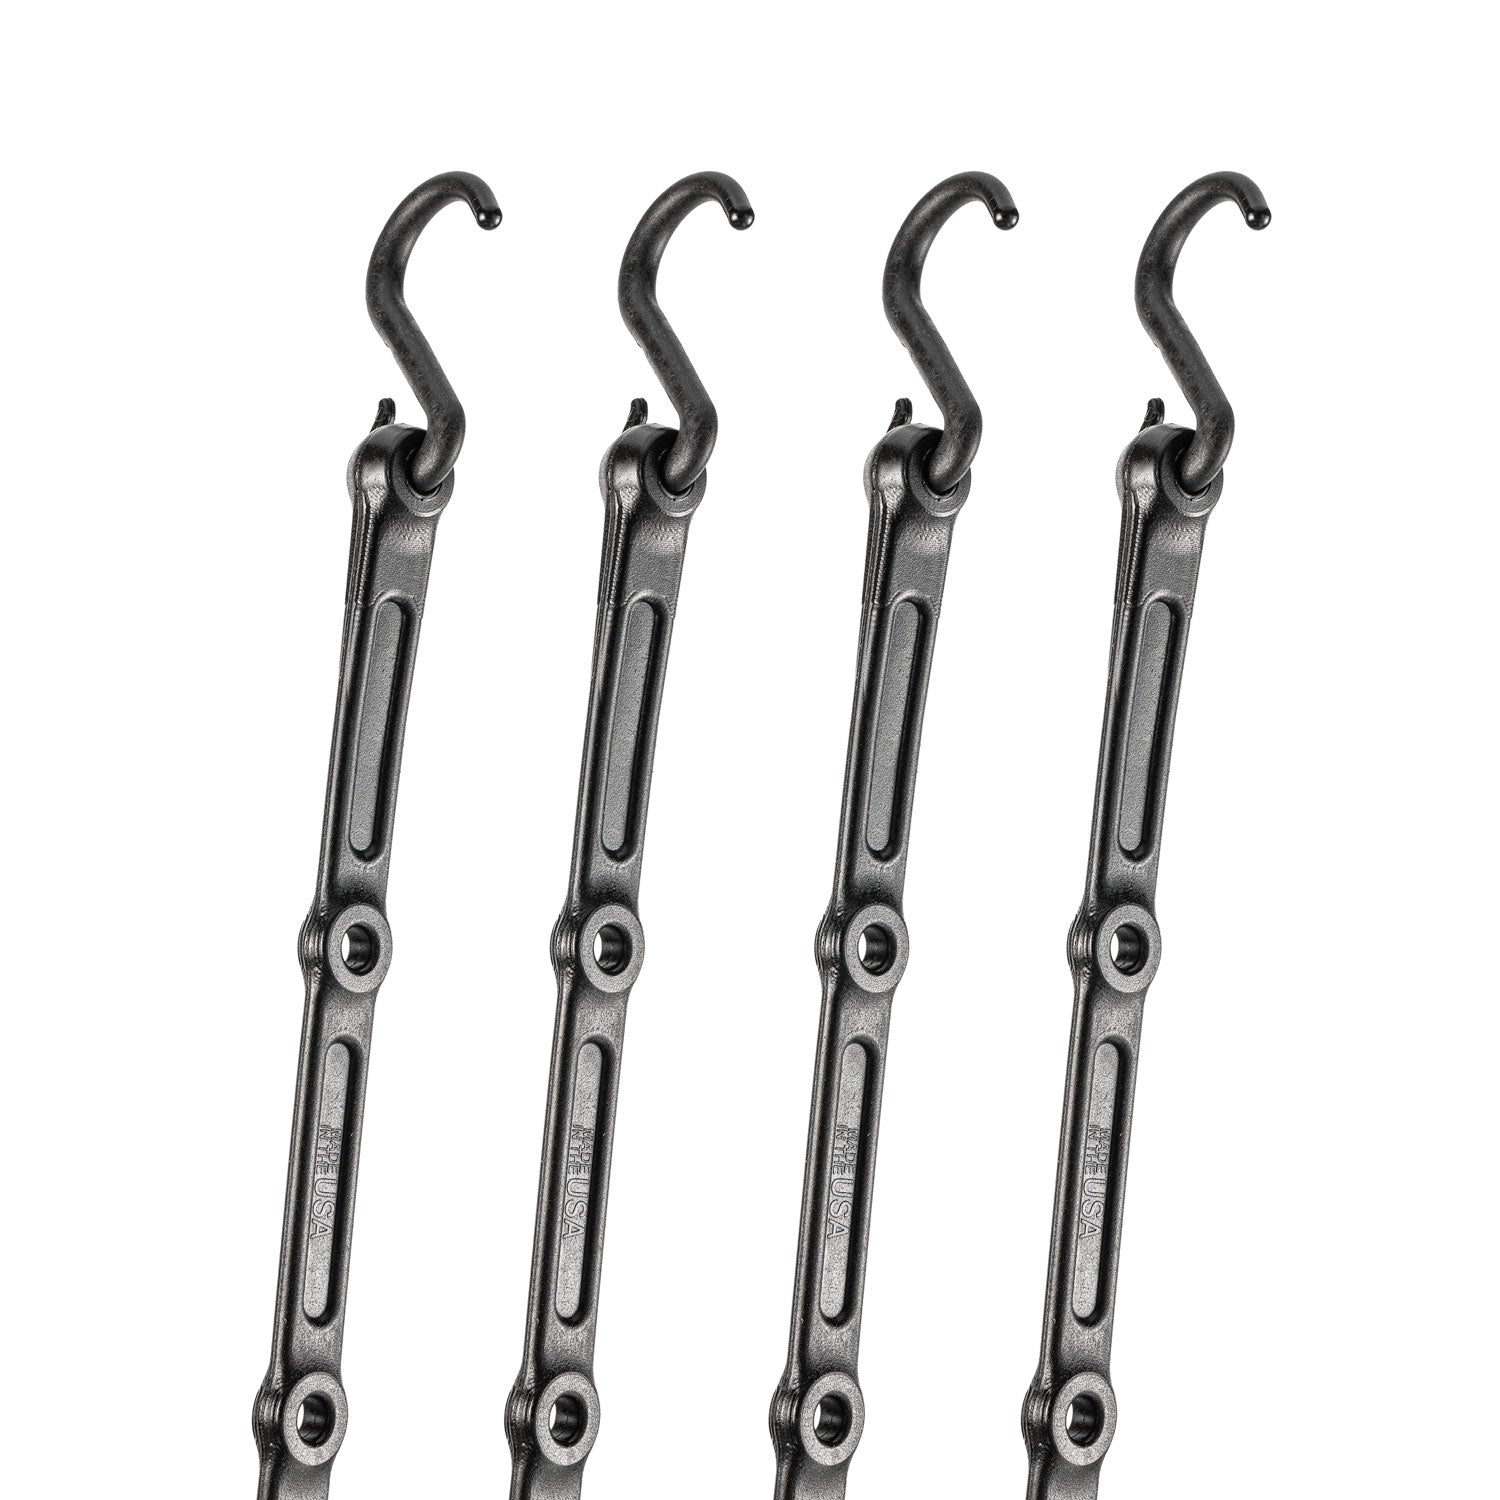 48" Adjust-A-Strap Adjustable Bungee Strap 4 Pack, Nylon Hooks - The Perfect Bungee & ShockStrap Tie Downs